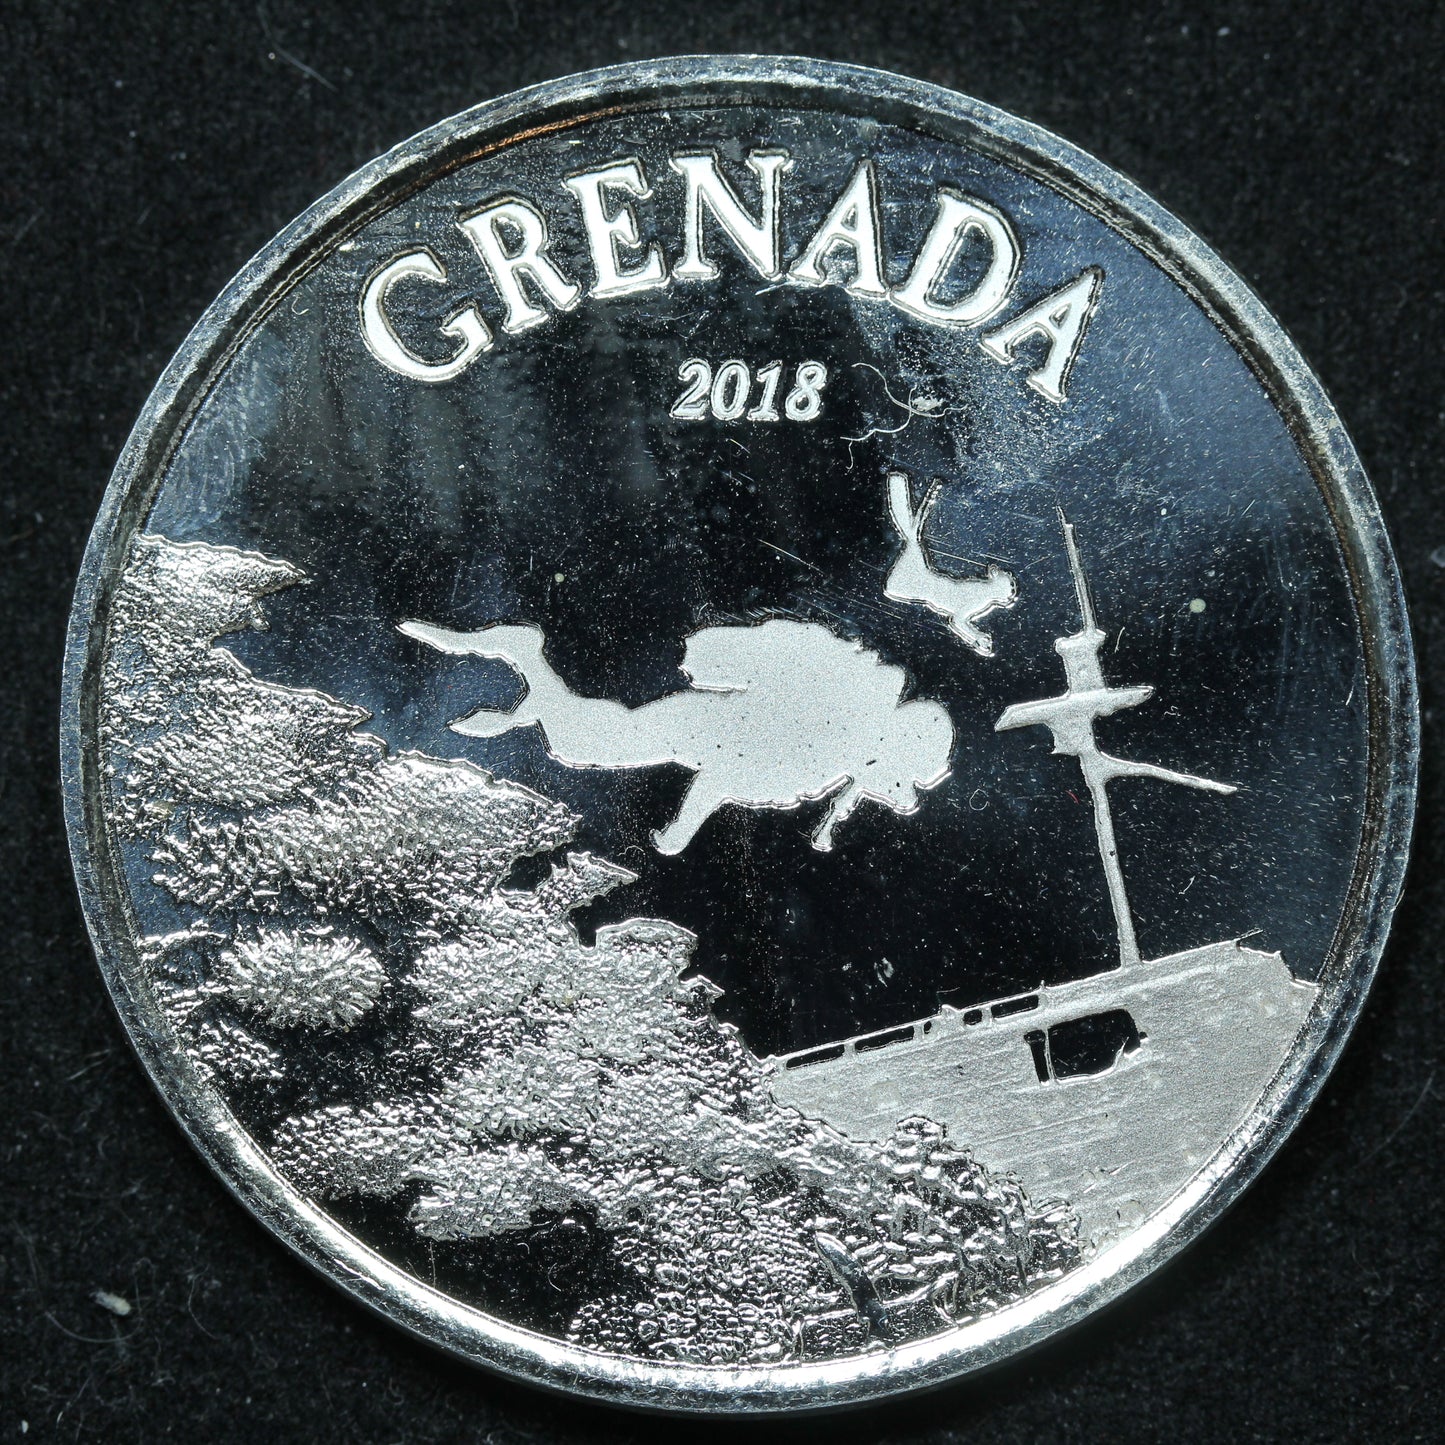 2018 $2 Two Dollars Grenada Diving Paradise 1 oz .999 Fine Silver Coin w/ Capsule